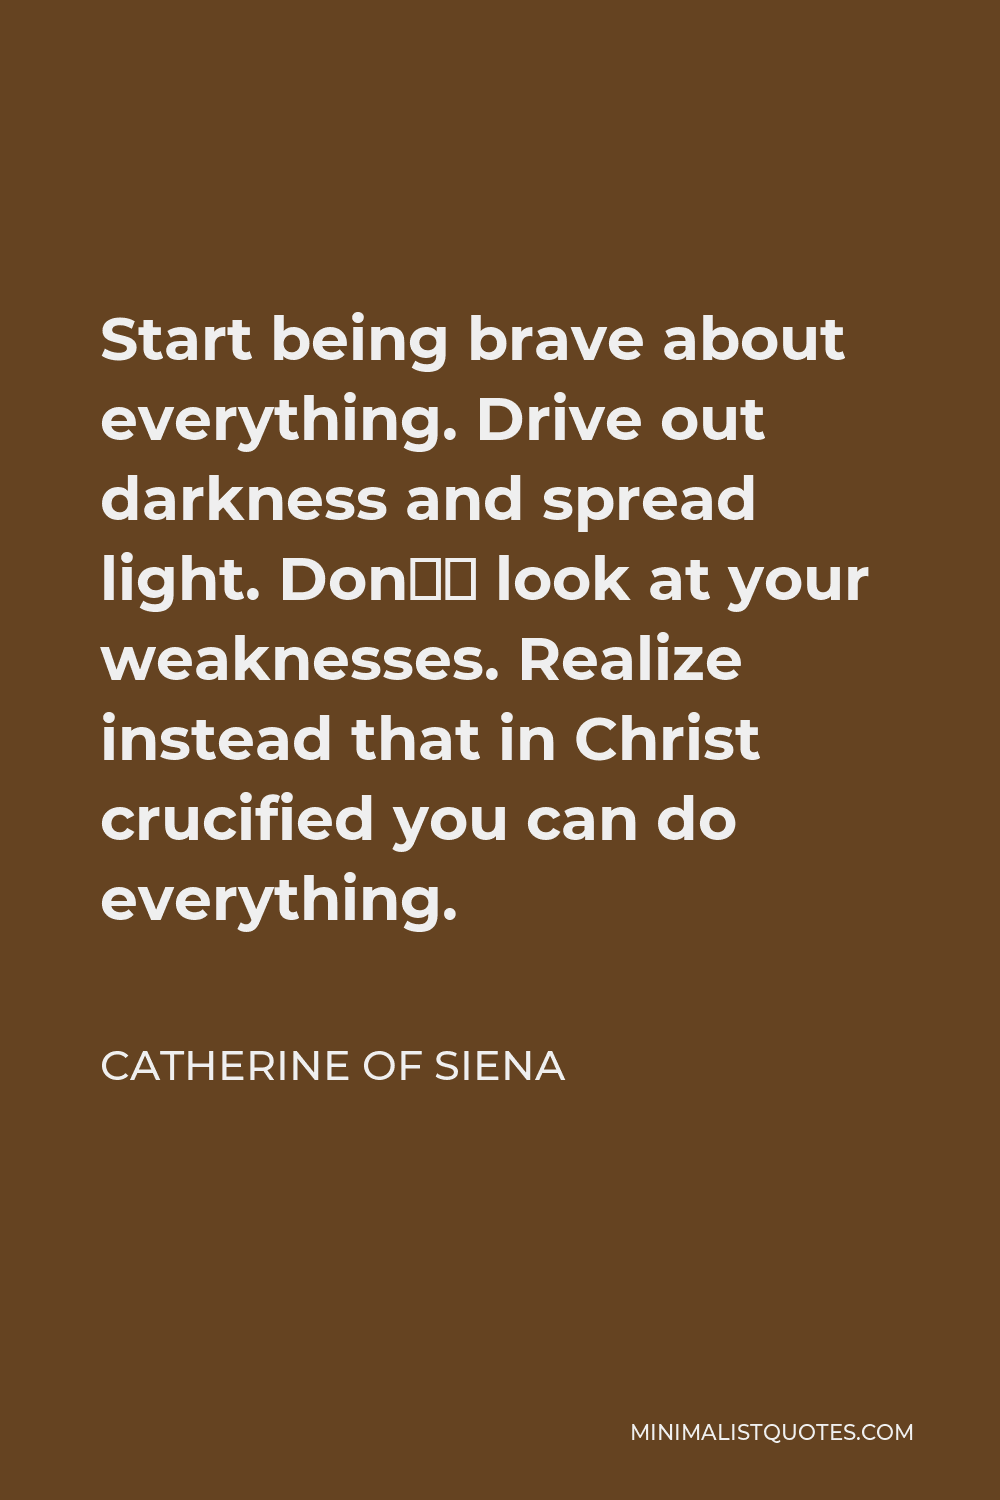 Catherine of Siena Quote - Start being brave about everything. Drive out darkness and spread light. Don’ look at your weaknesses. Realize instead that in Christ crucified you can do everything.